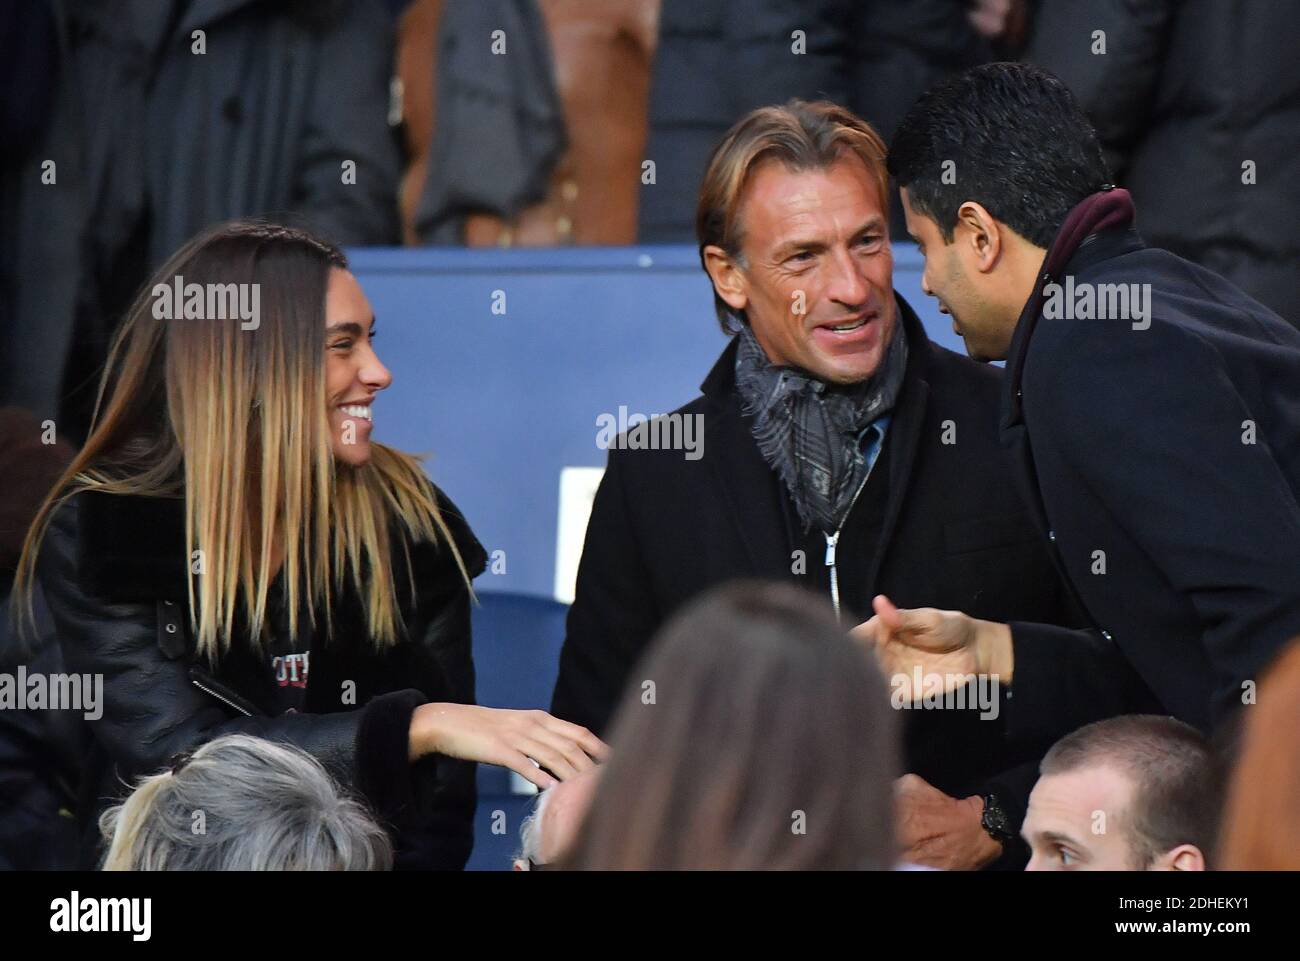 Herve Renard and his daughter Candide Renard during the Ligue 1 match  between Paris Saint Germain and Nantes at Parc des Princes on November 18,  2017 in Paris, France. Photo by Christian